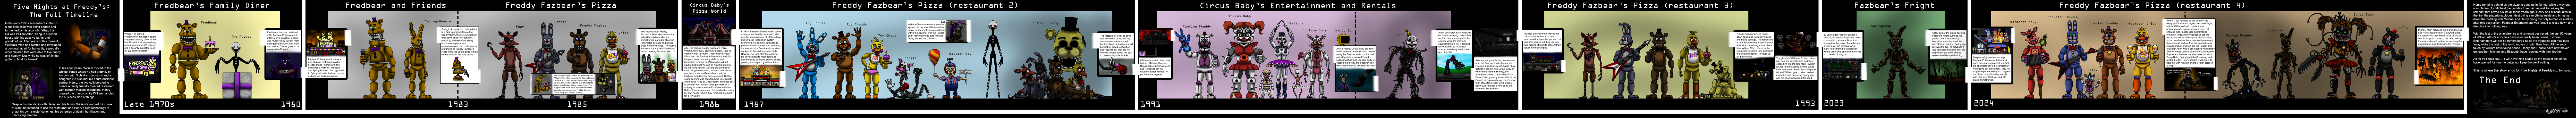 Five Nights at Freddy's timeline: The horror games' in-universe chronology  and history explained